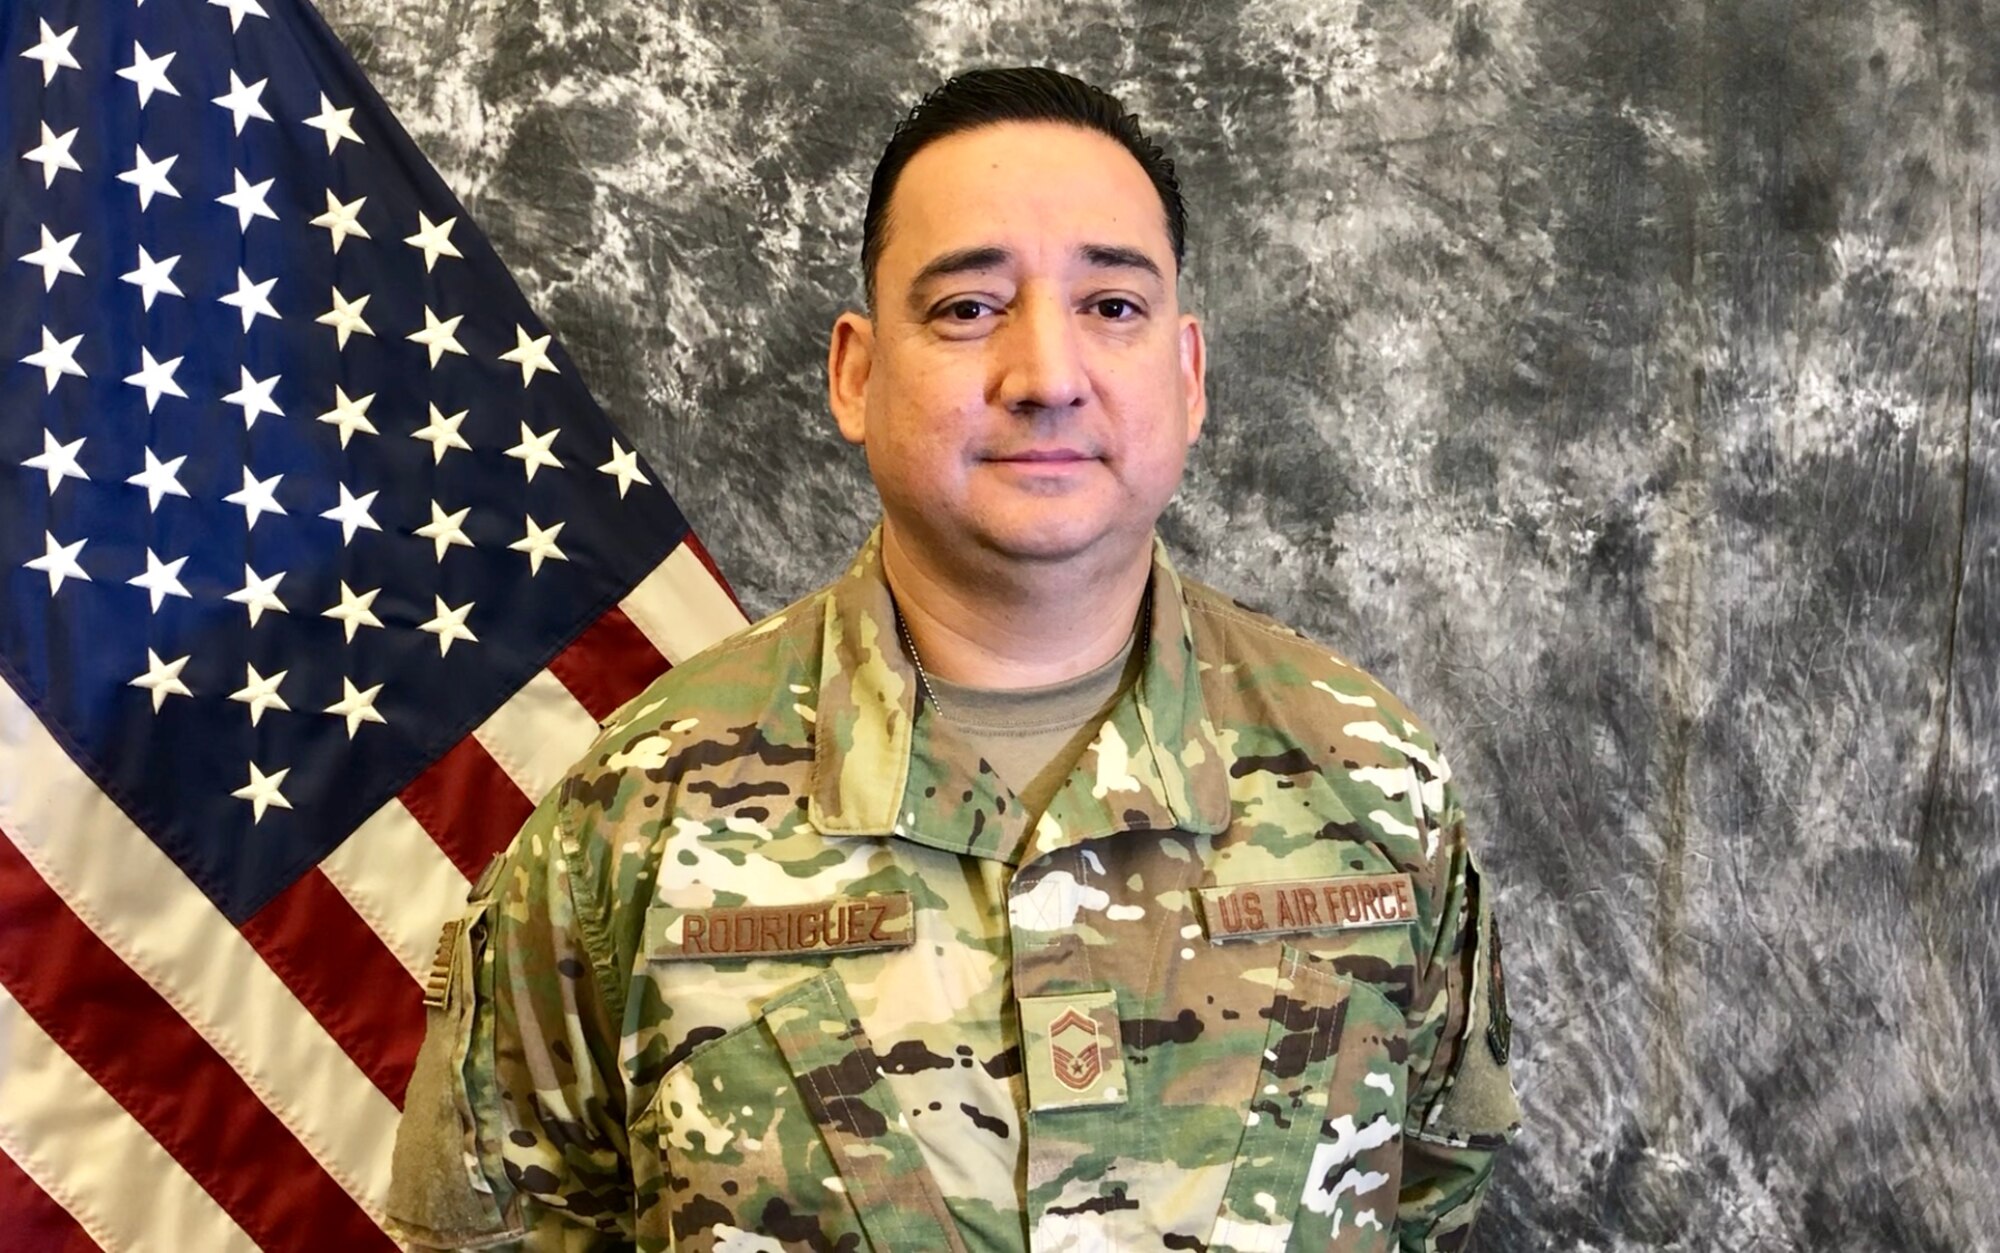 MARCH AIR RESERVE BASE, CALIF (March 25, 2019) --- Senior Master Sgt. Jorge Rodriguez was presented with the Arrowhead Regional Medical Center's Nurse of the Year award early this year